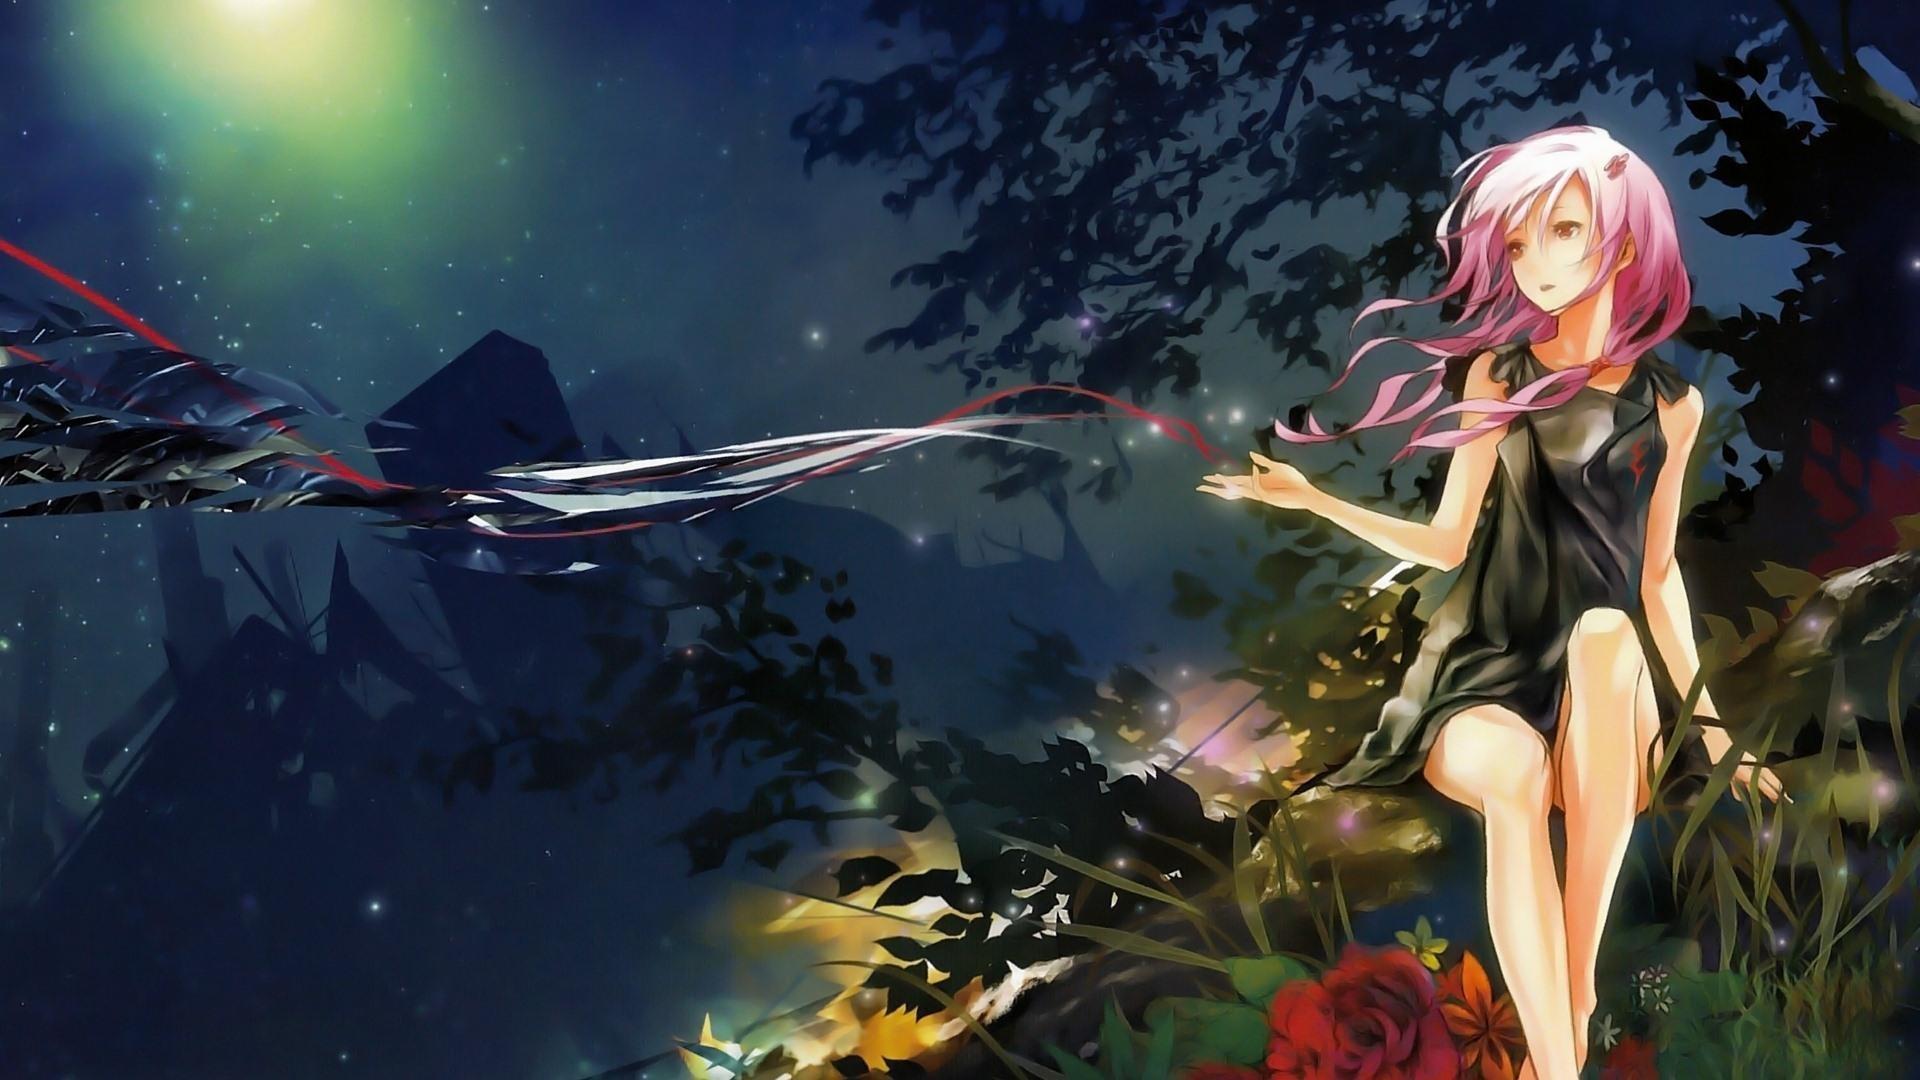 Anime Full HD 1920x1080 Wallpapers - Wallpaper Cave